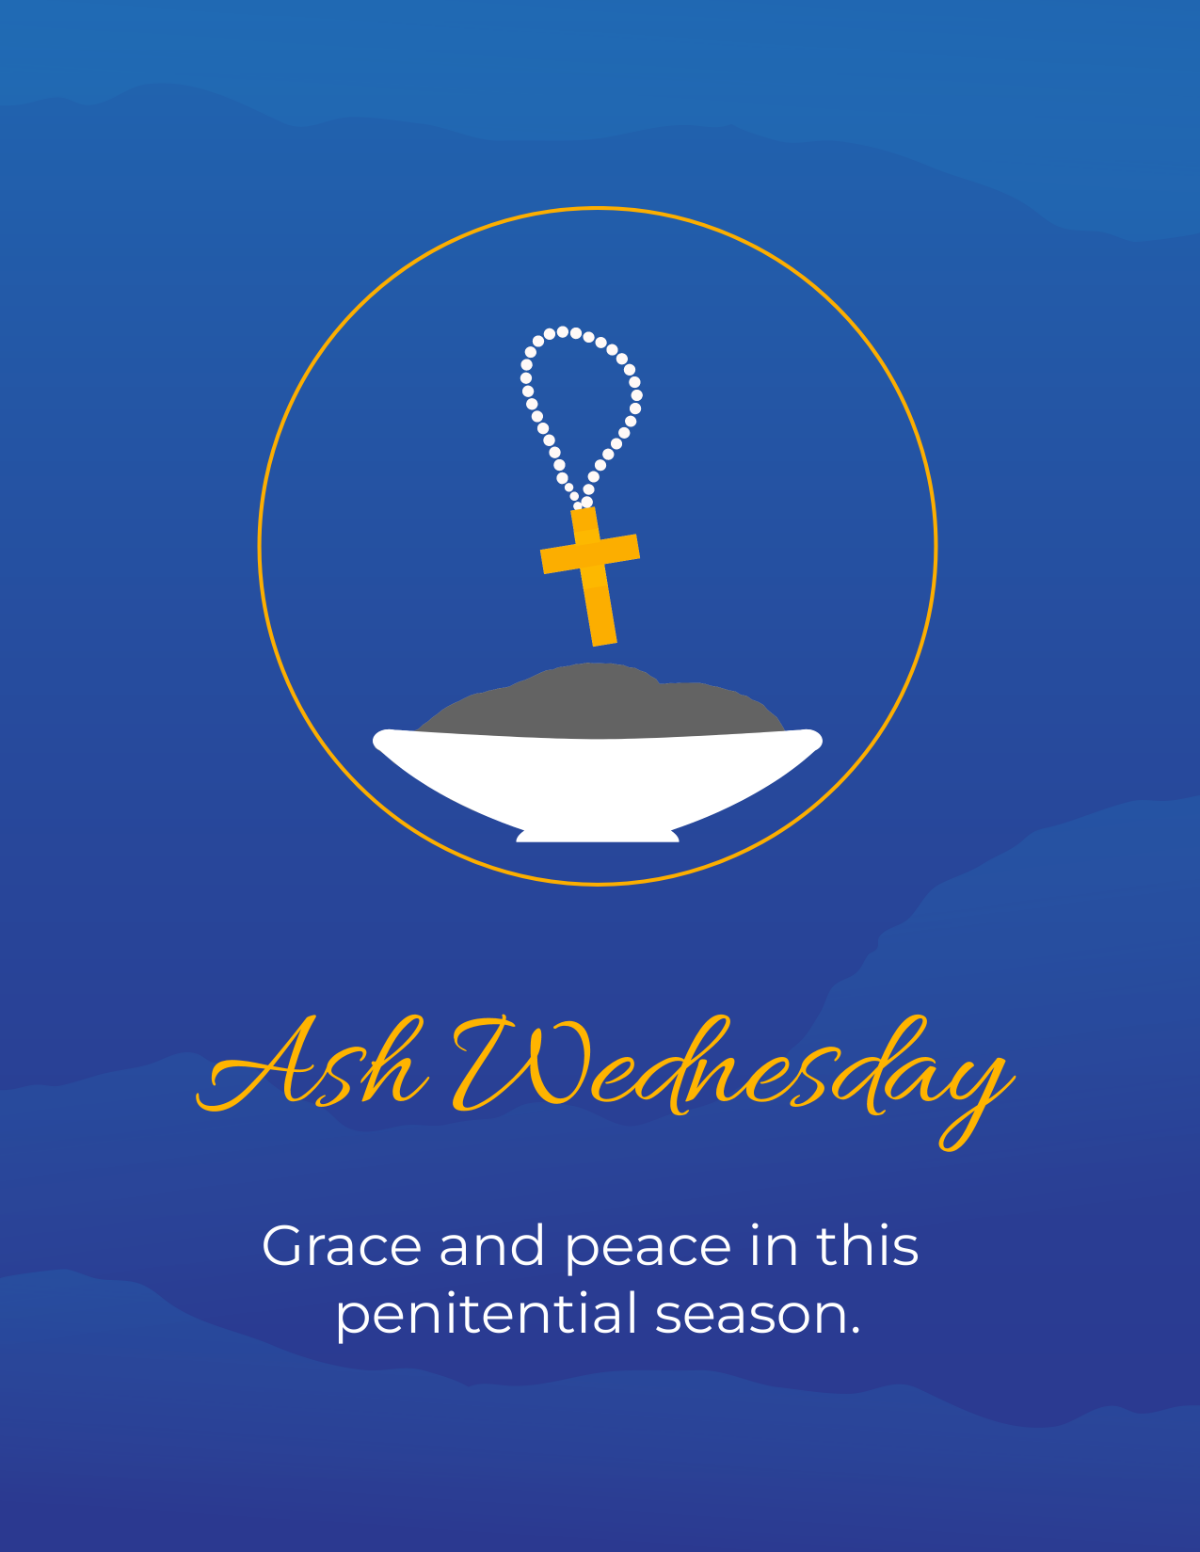 Ash Wednesday Flyer Template